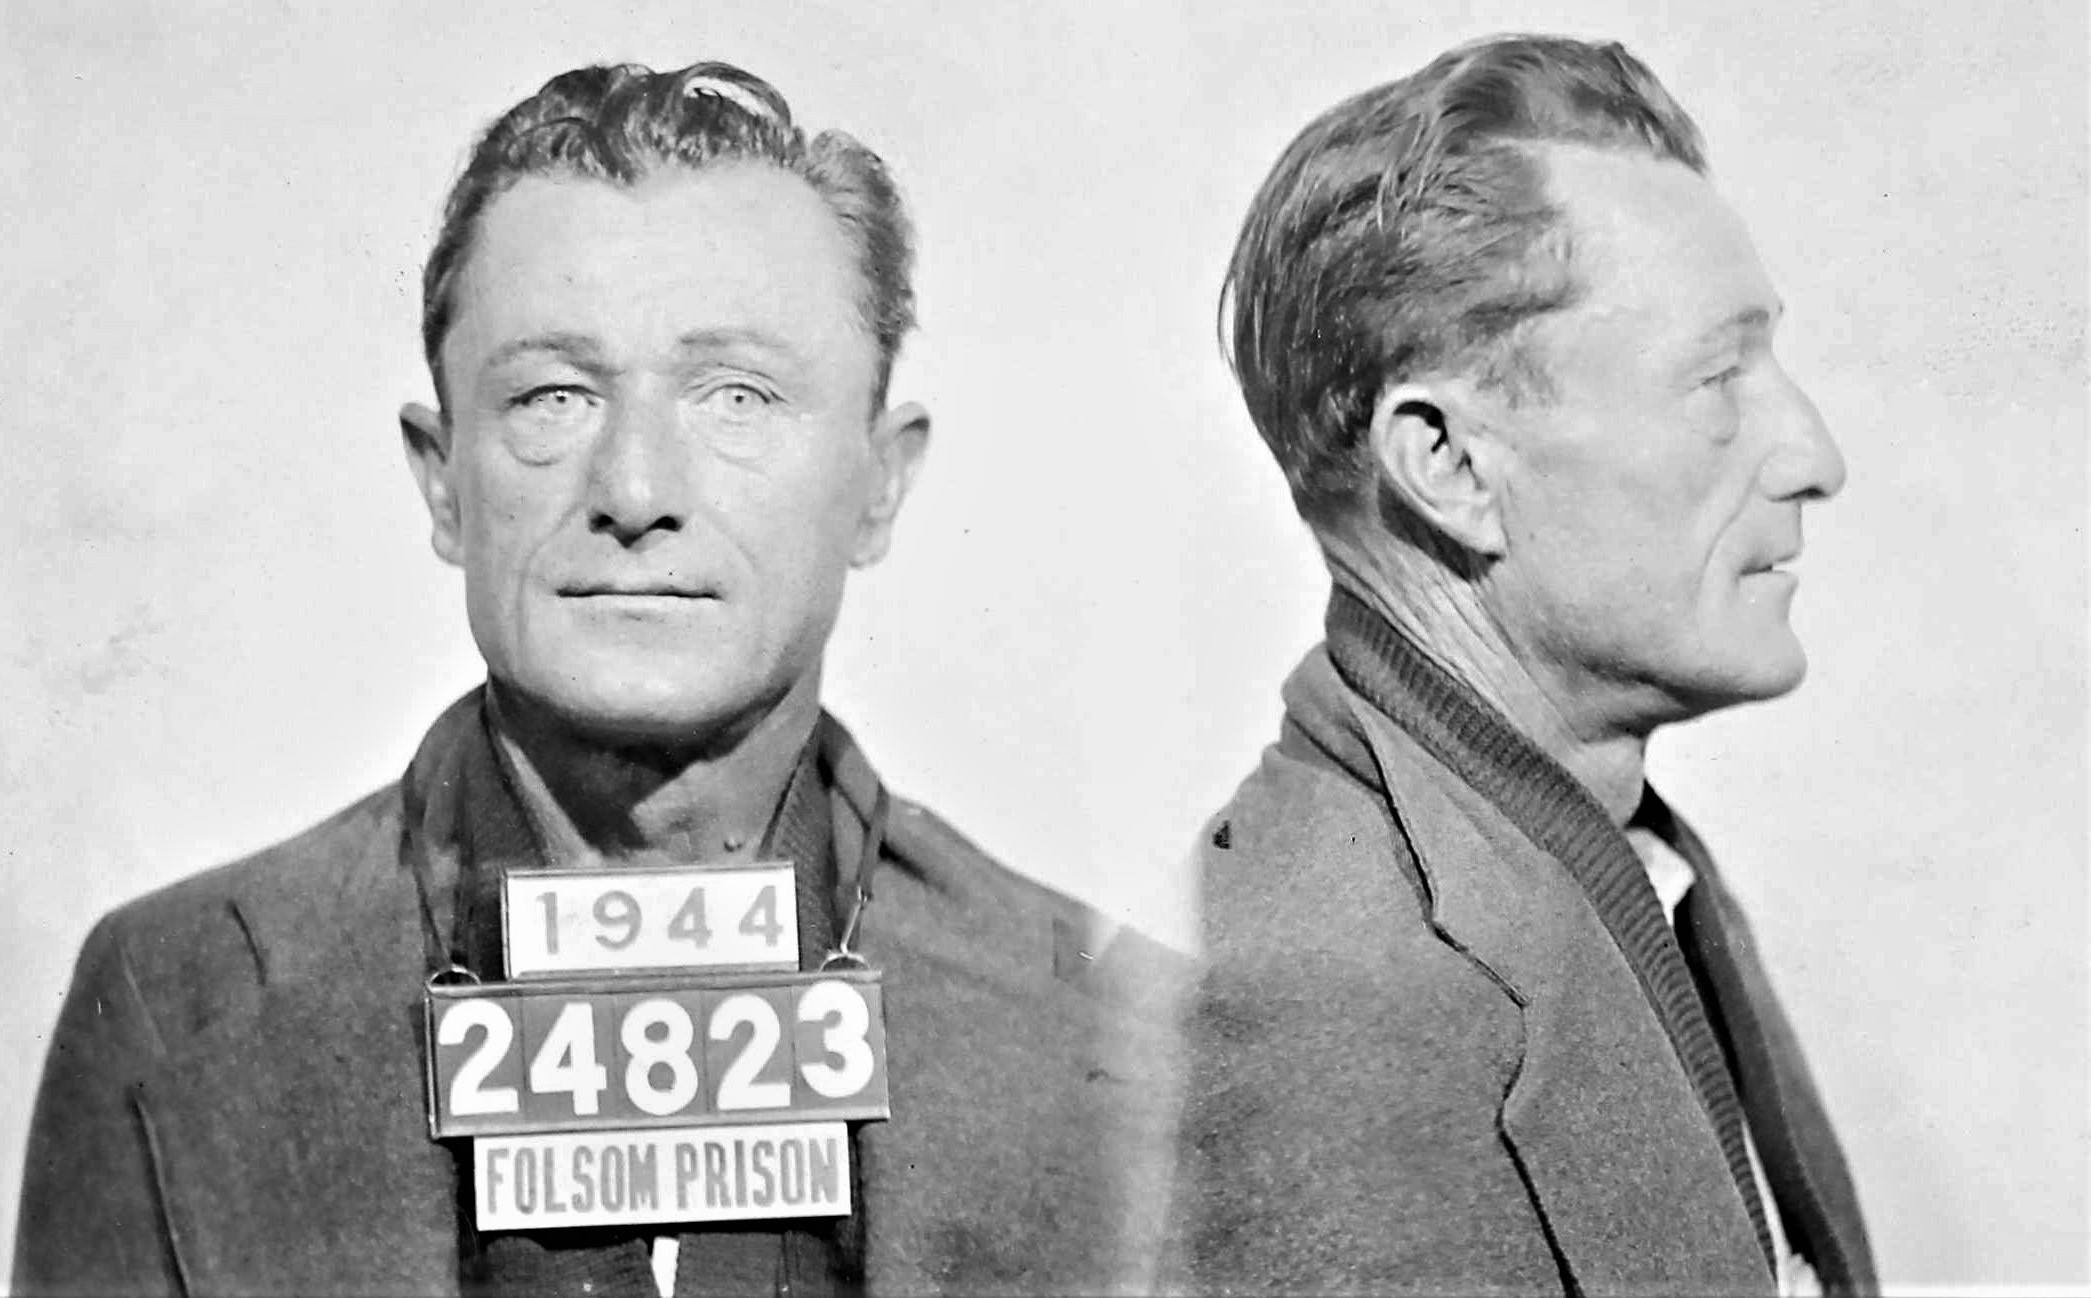 Man looking front and side with 1944, Folsom Prison and number 24823.